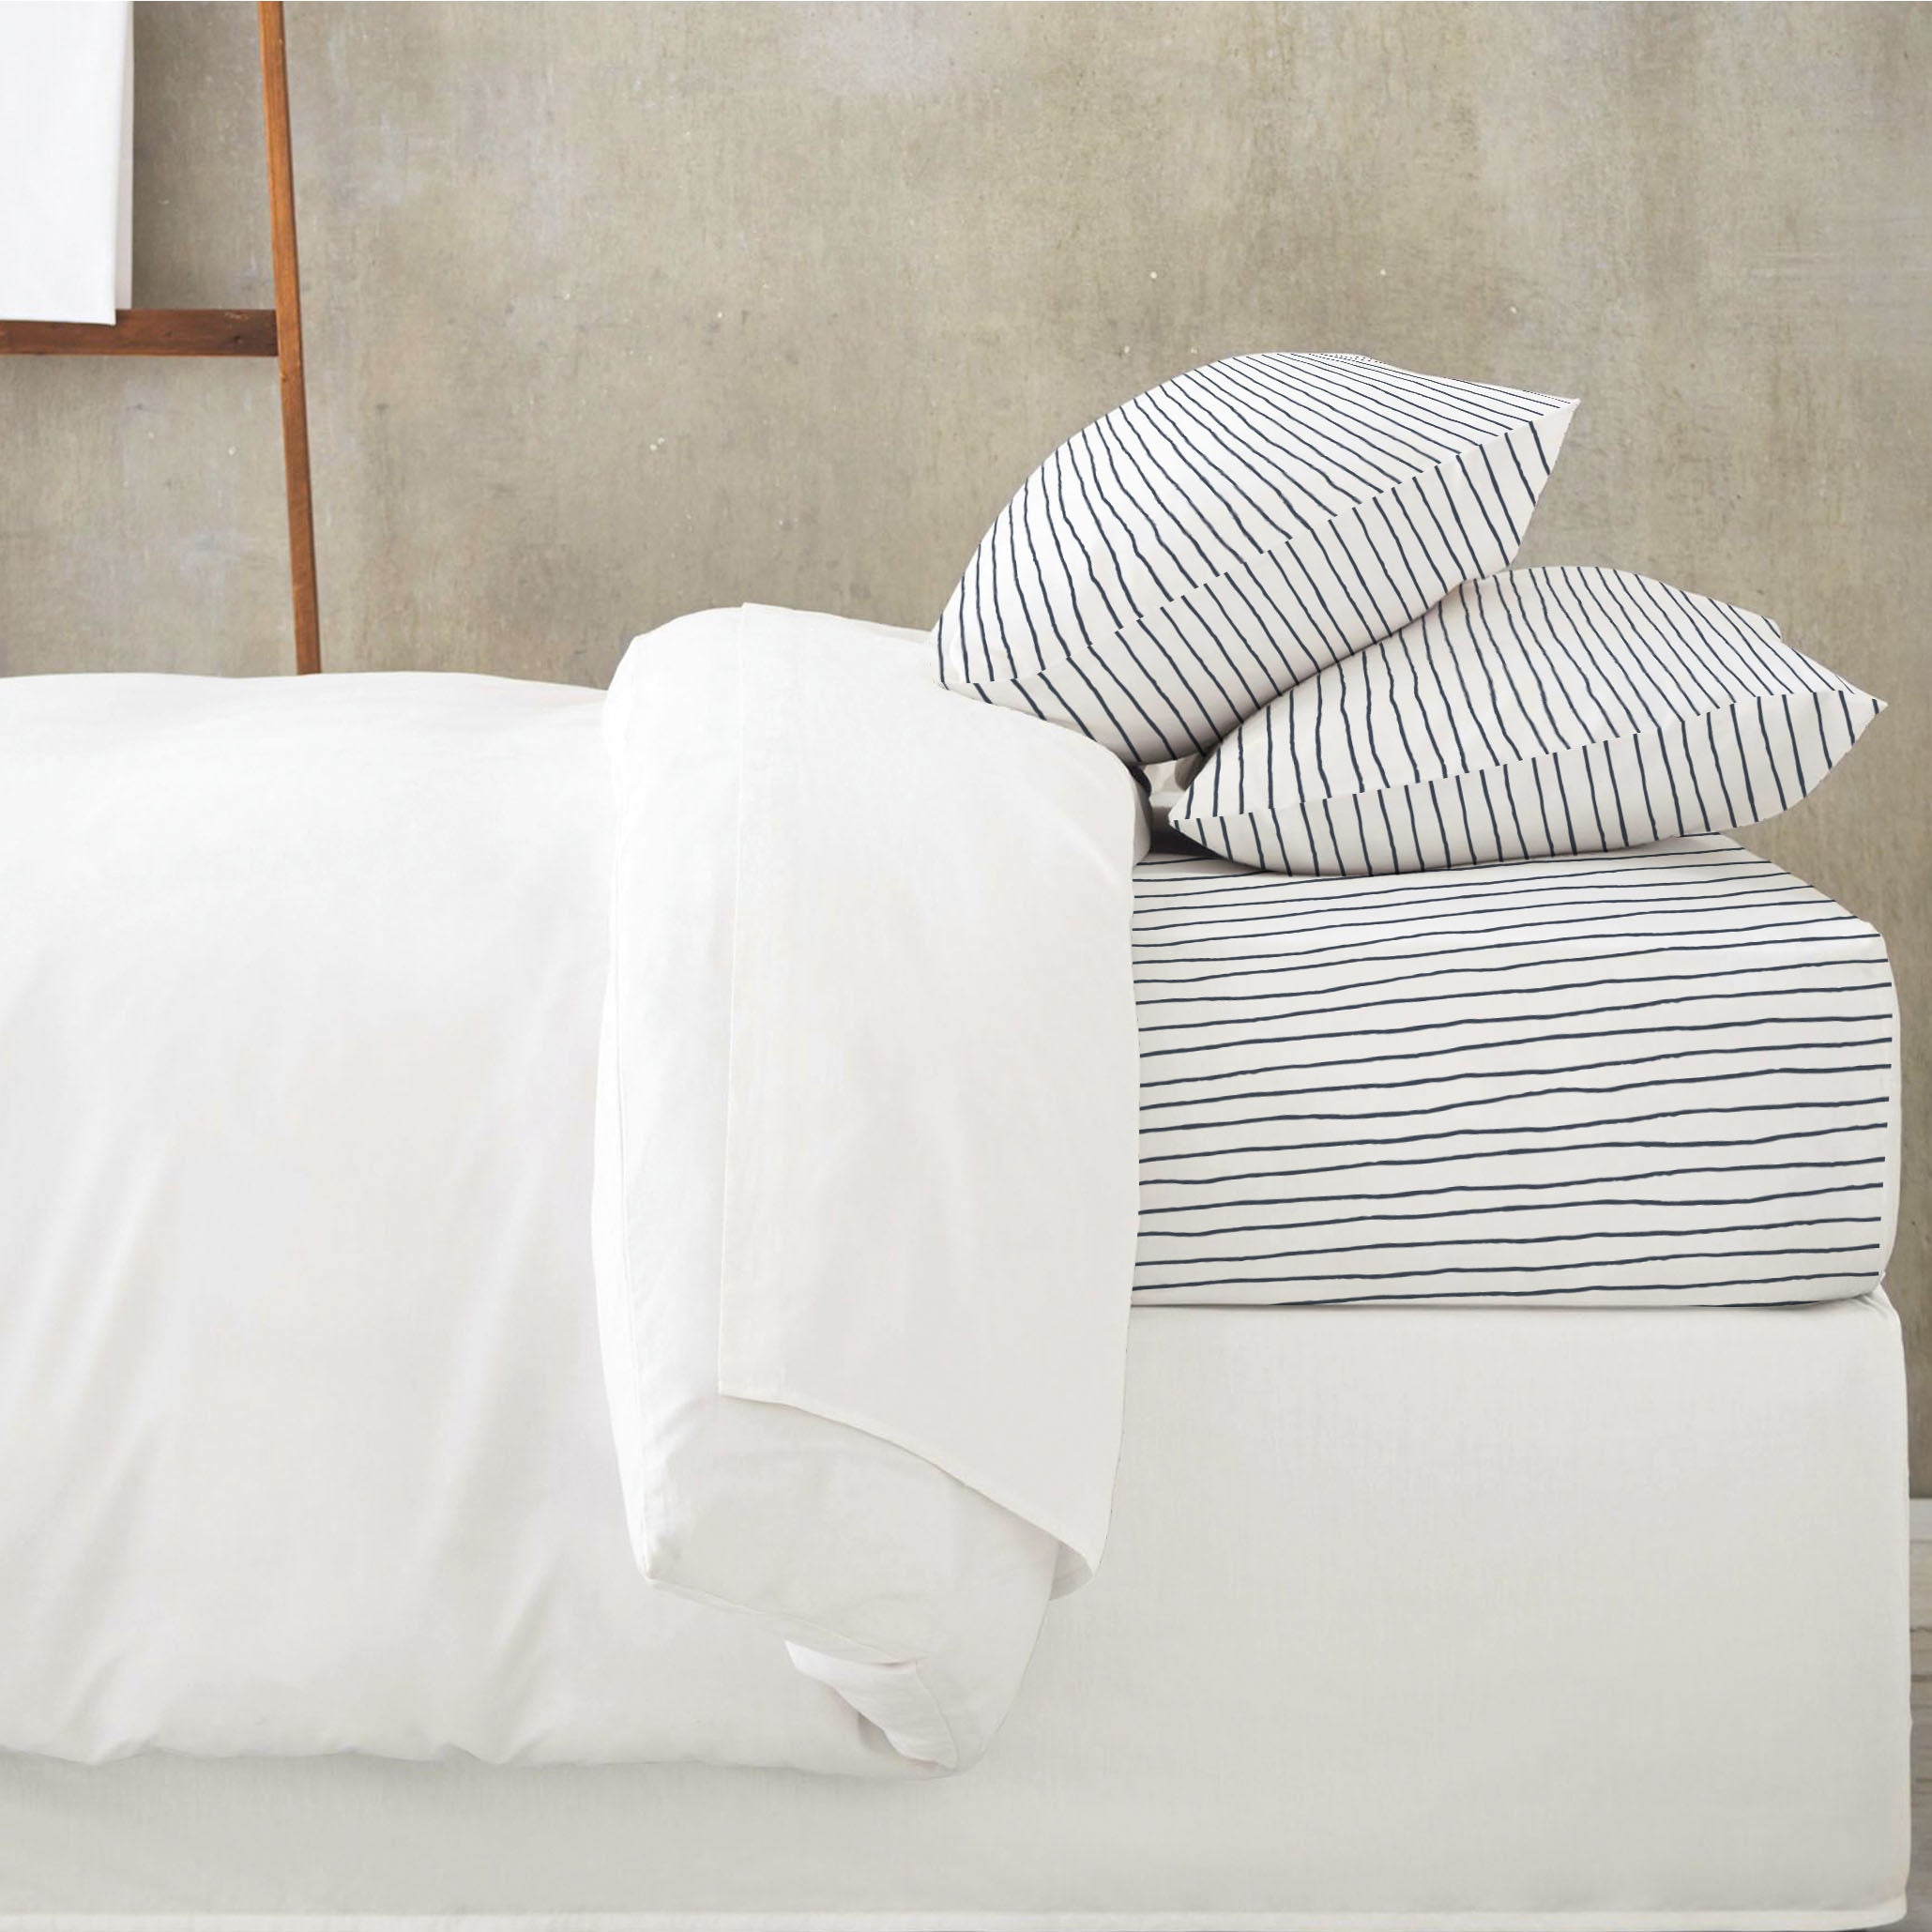 A neatly made bed with white bedding and Makemake Organics Organic Cotton Fitted Sheet Set in Navy Stripes against a muted gray background.